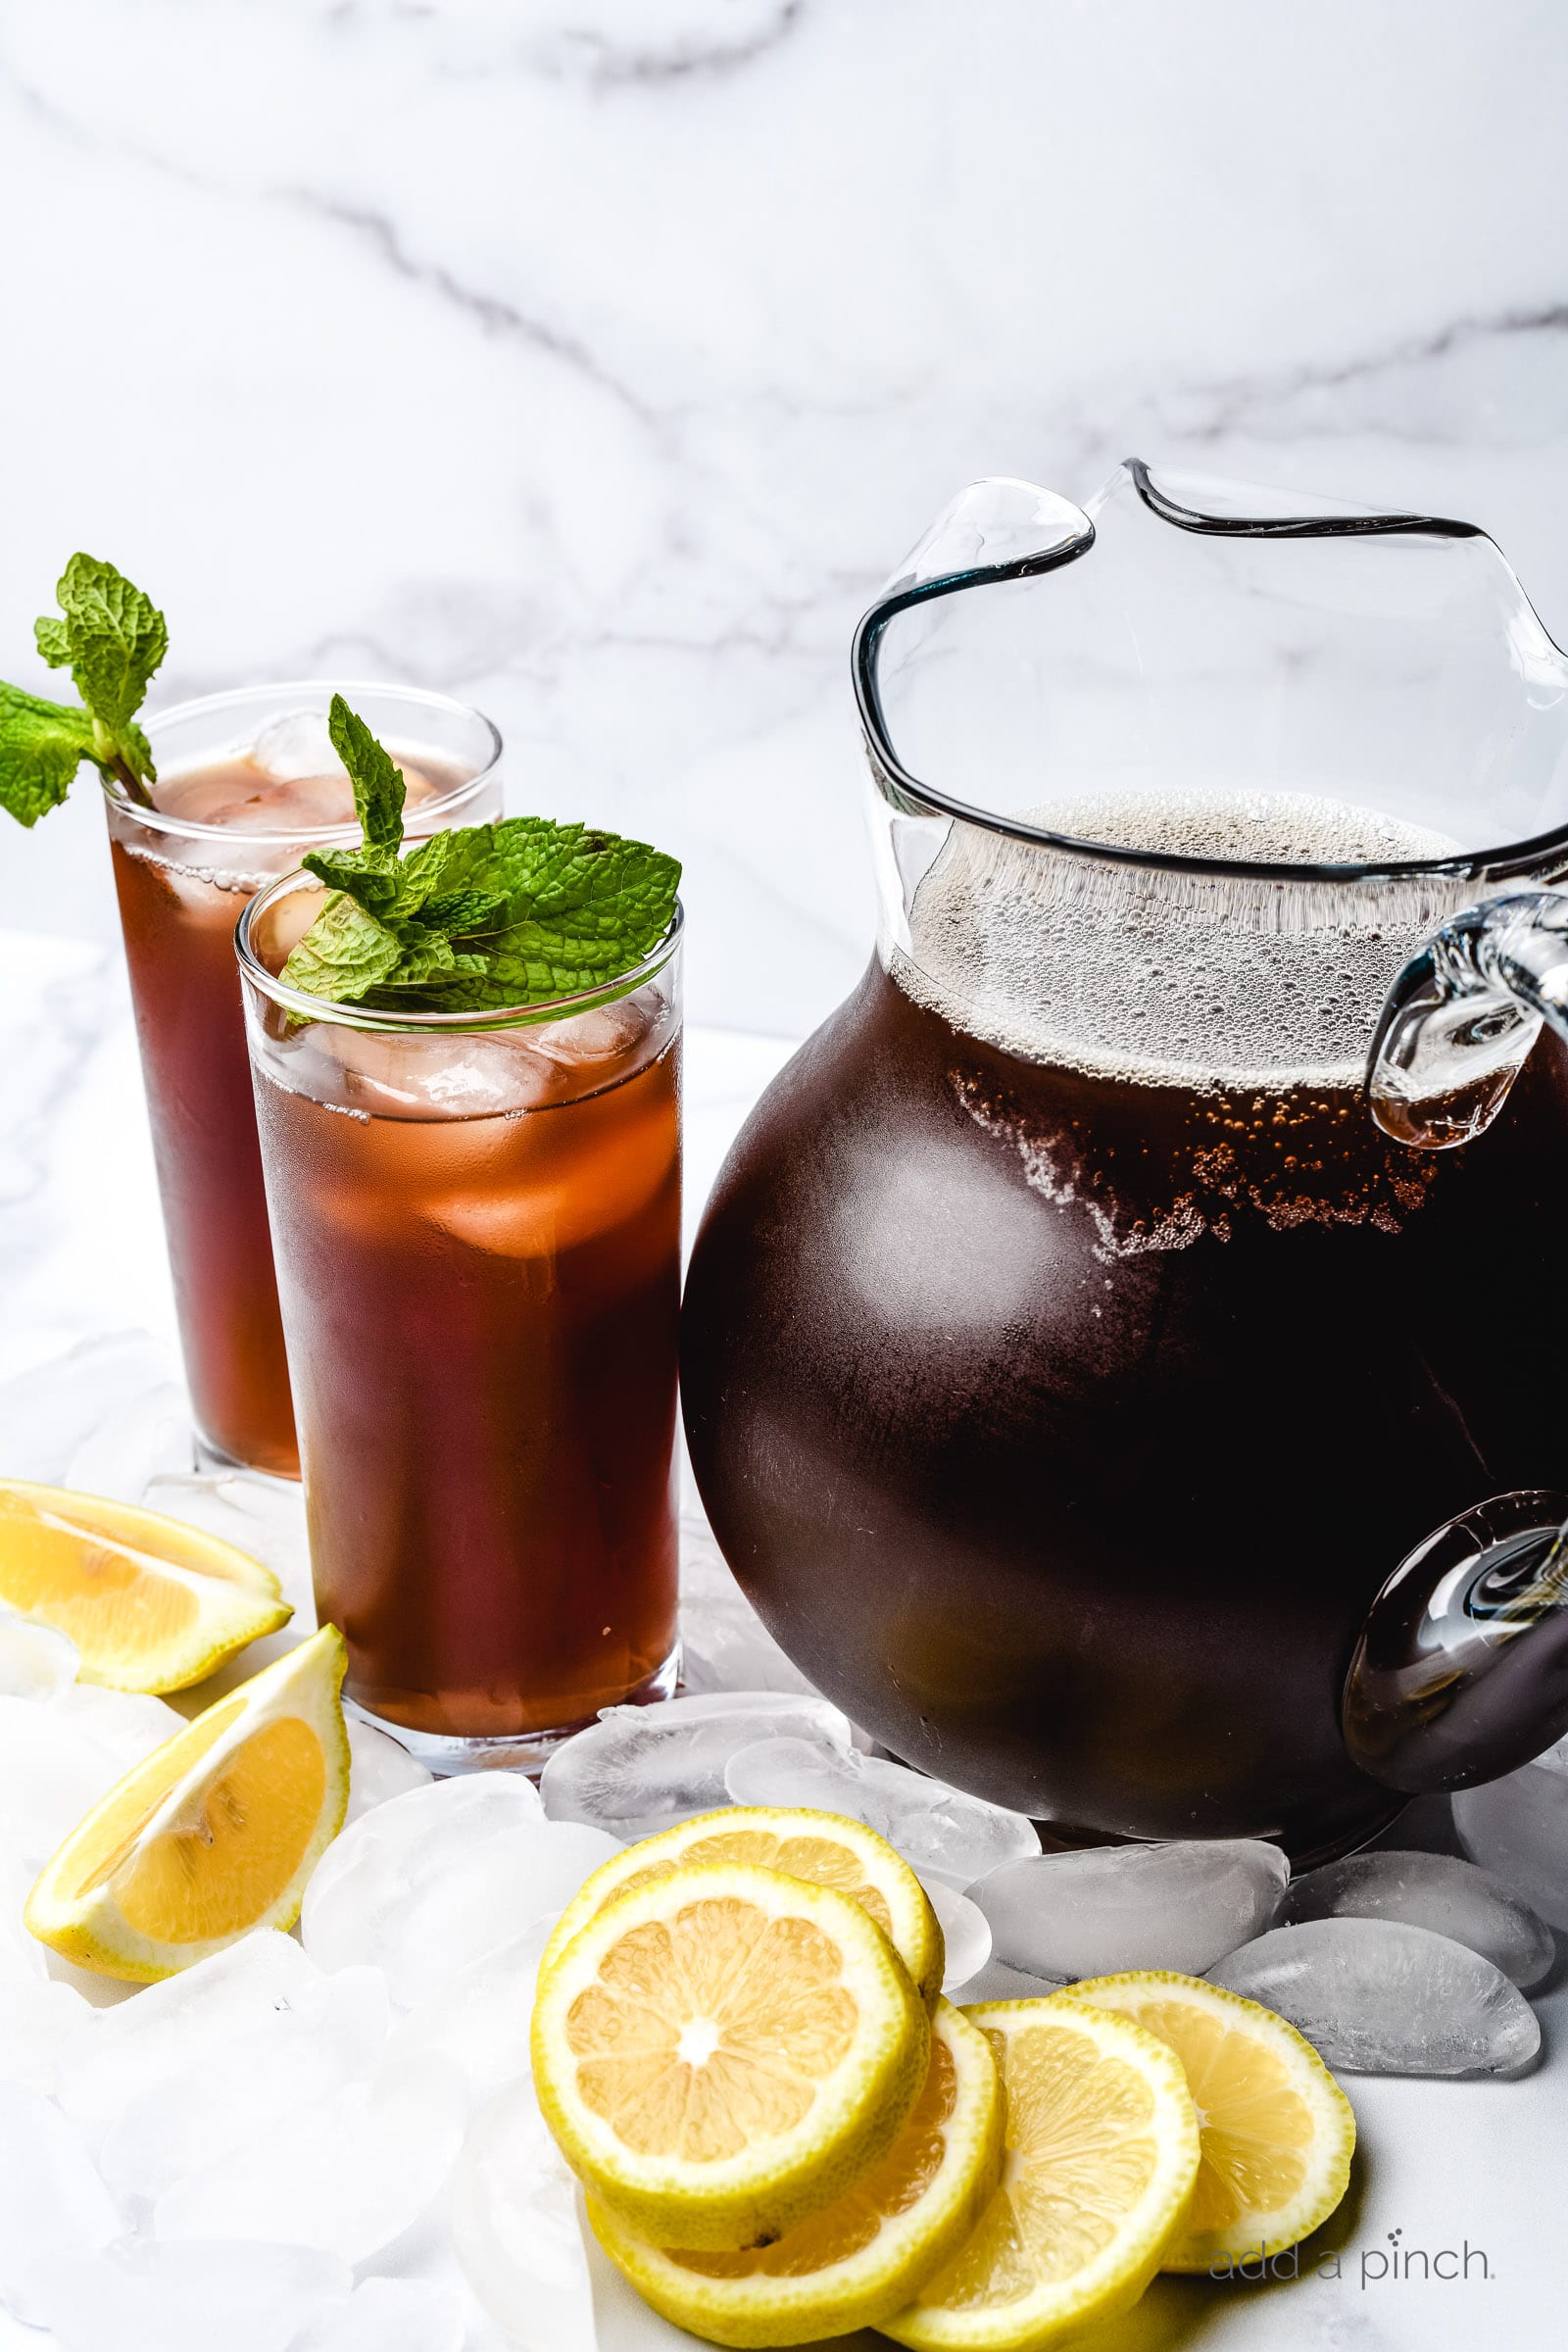 Southern Sweet Tea Recipe (Step-by-Step, Refreshing)